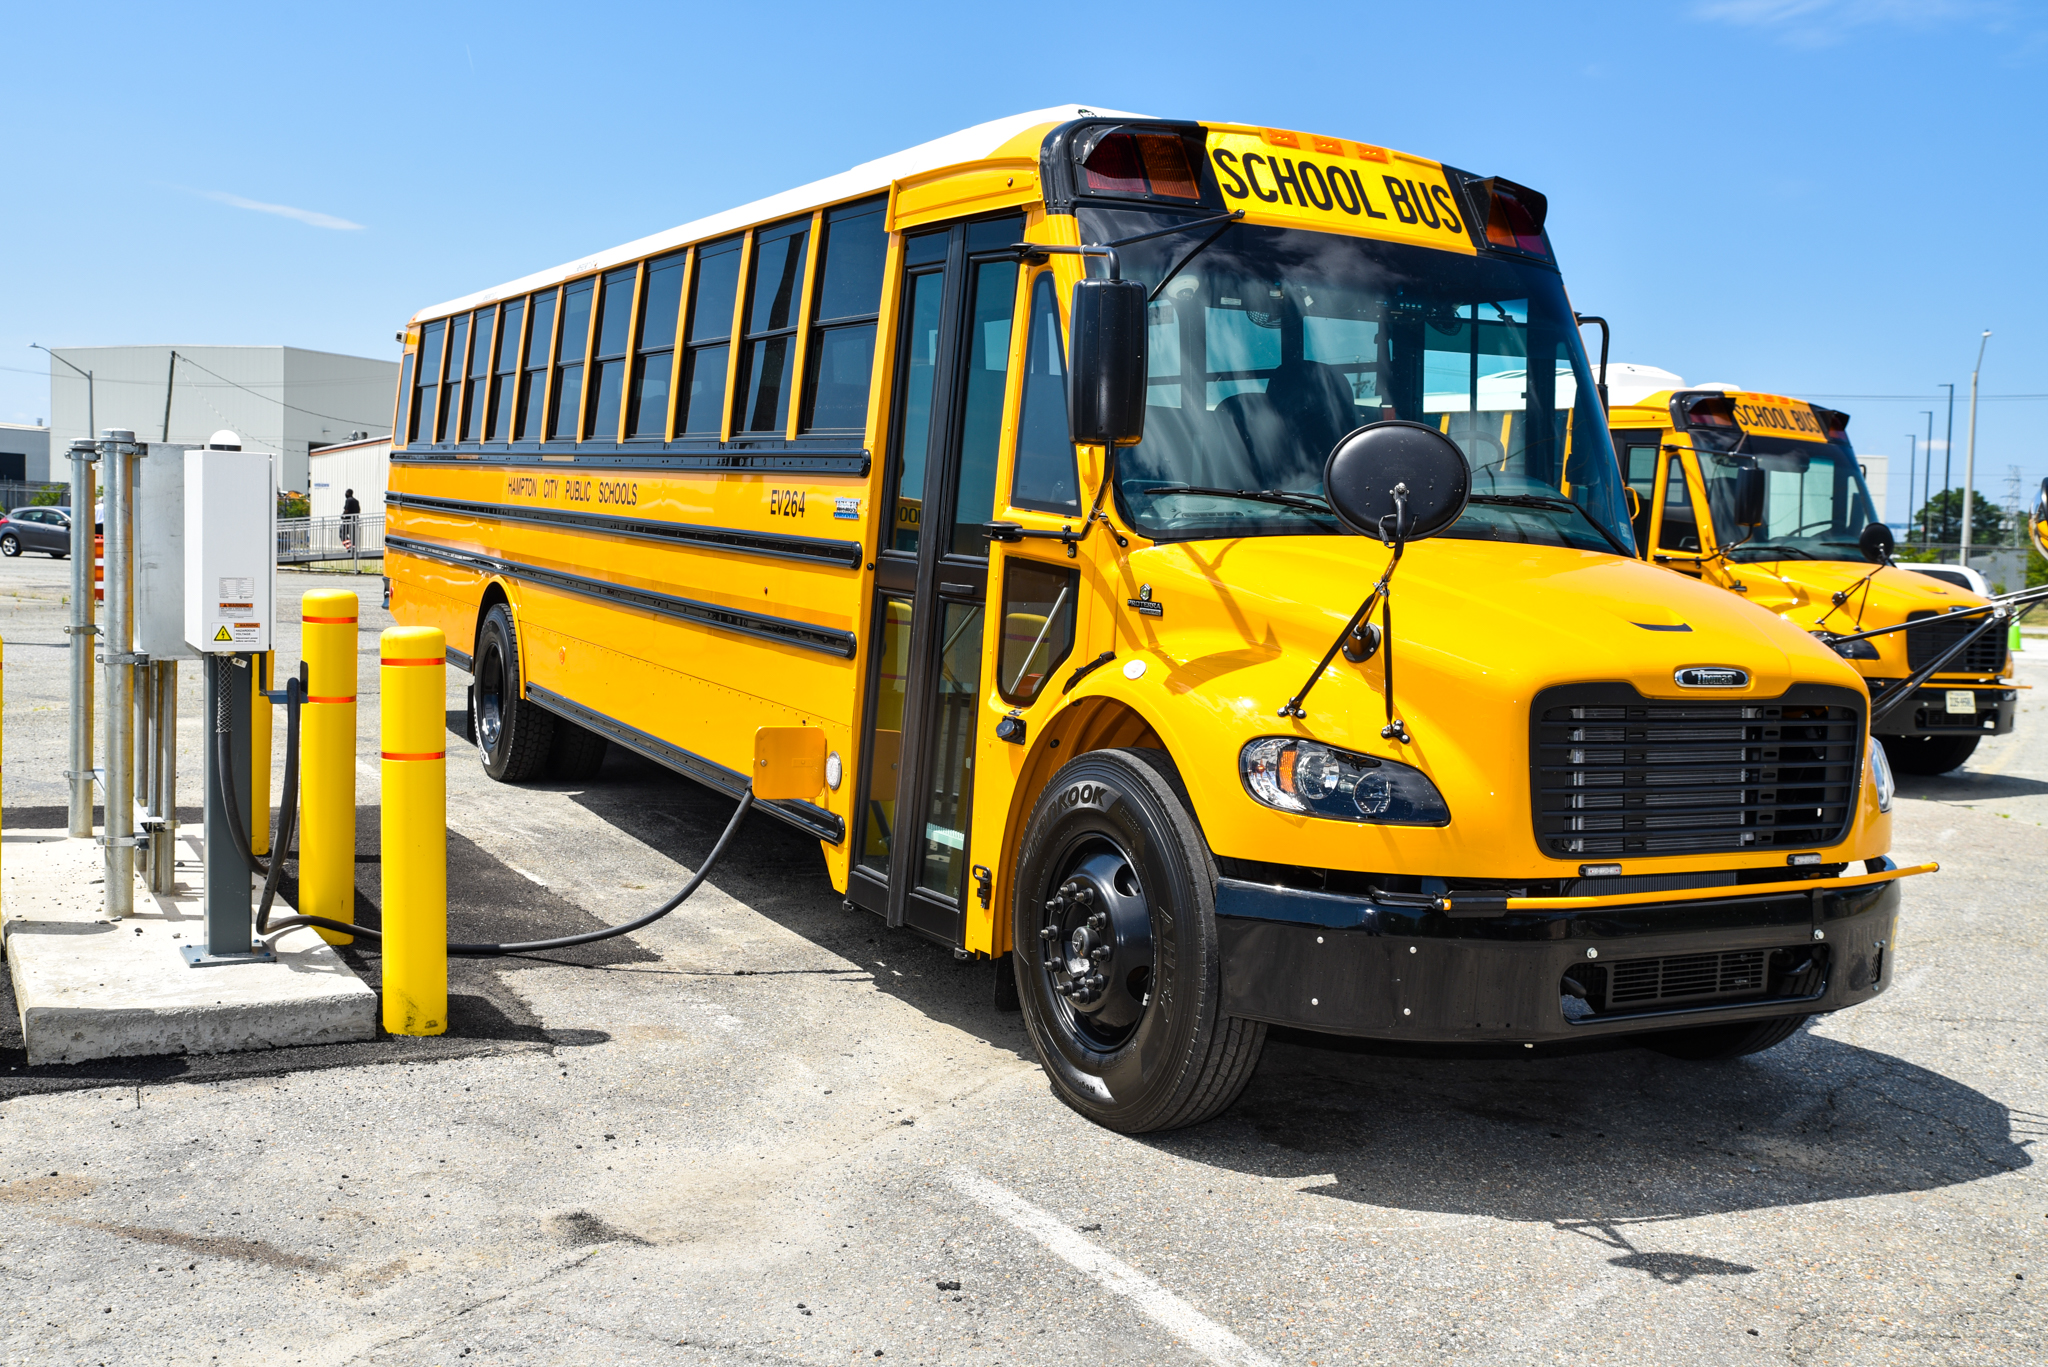 Dominion Energy’s Electric School Bus Program Surpasses 1.5 Million Electric Miles in Virginia with Thomas Built Buses’ Jouley